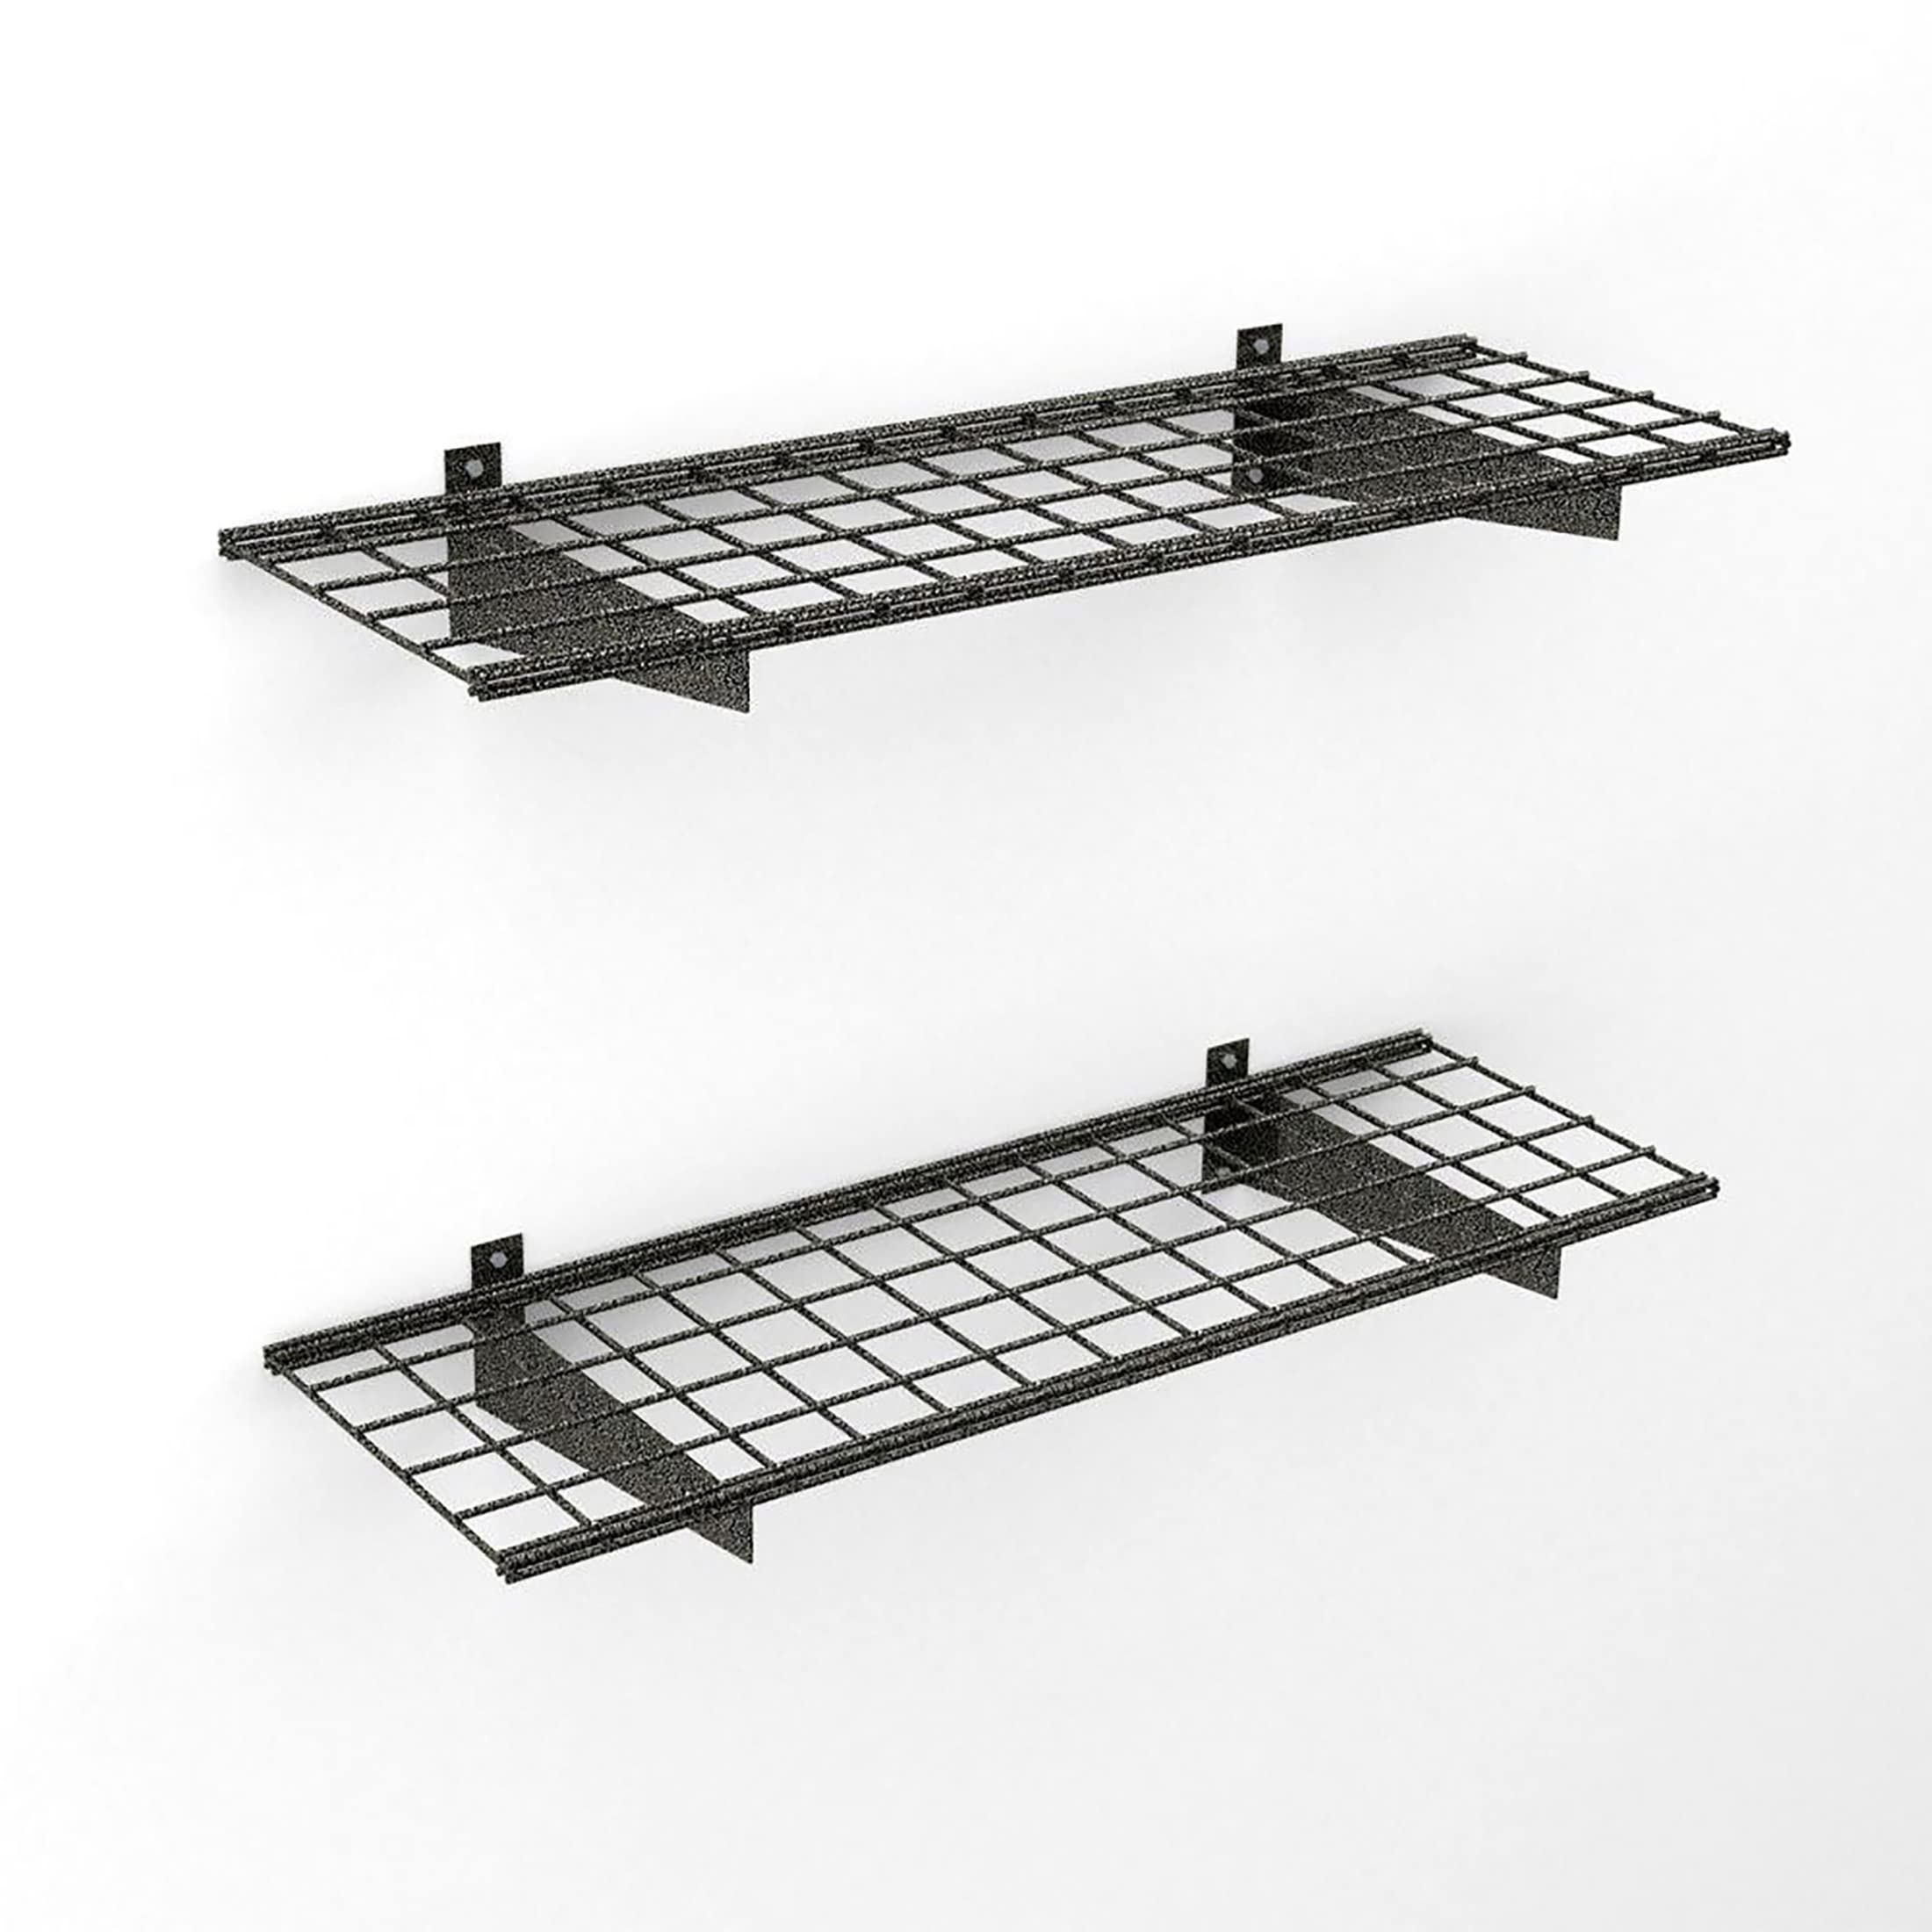 2-Pack HyLoft Wire Garage Wall Shelf Storage System (45 in. x 15 in.)  $40.50 + Free Shipping